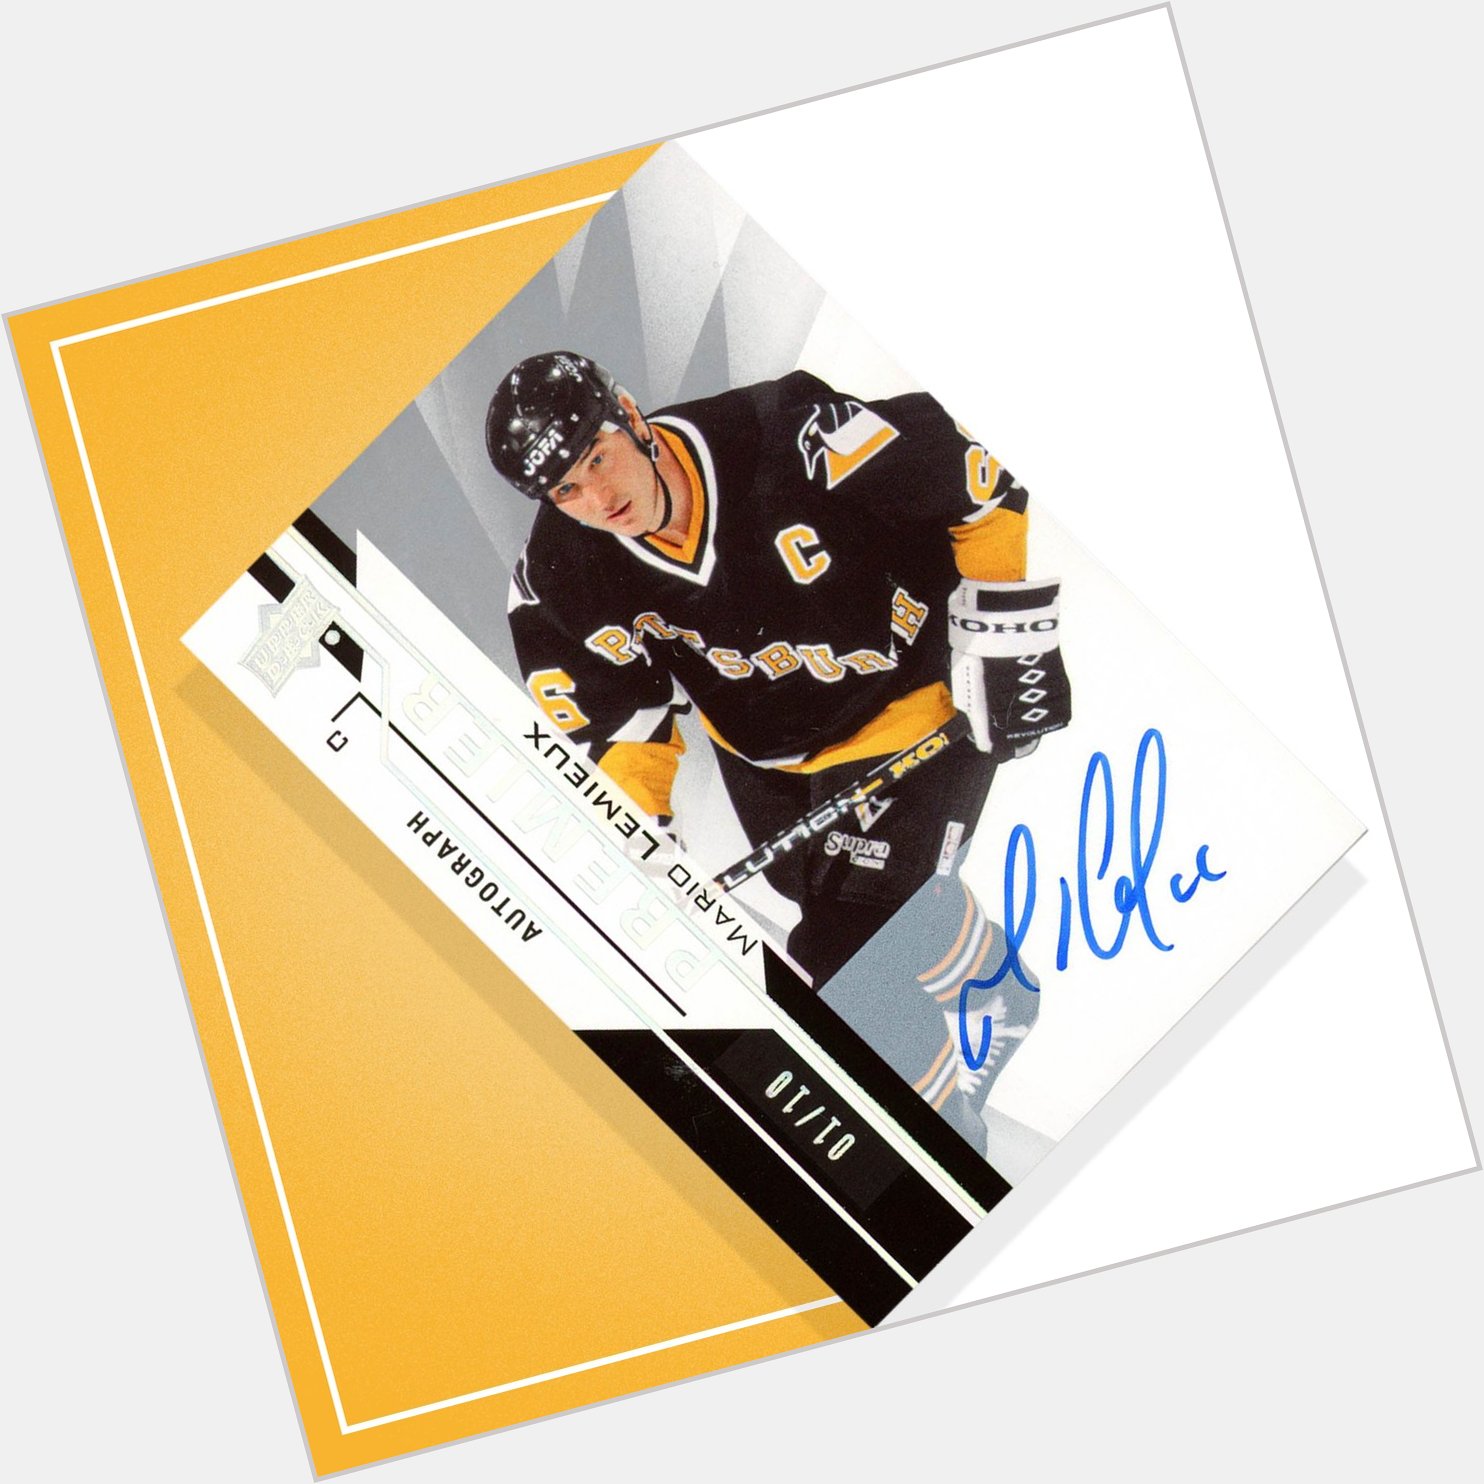 Happy Birthday to Mario Lemieux! This card will be up for auction Wednesday at  